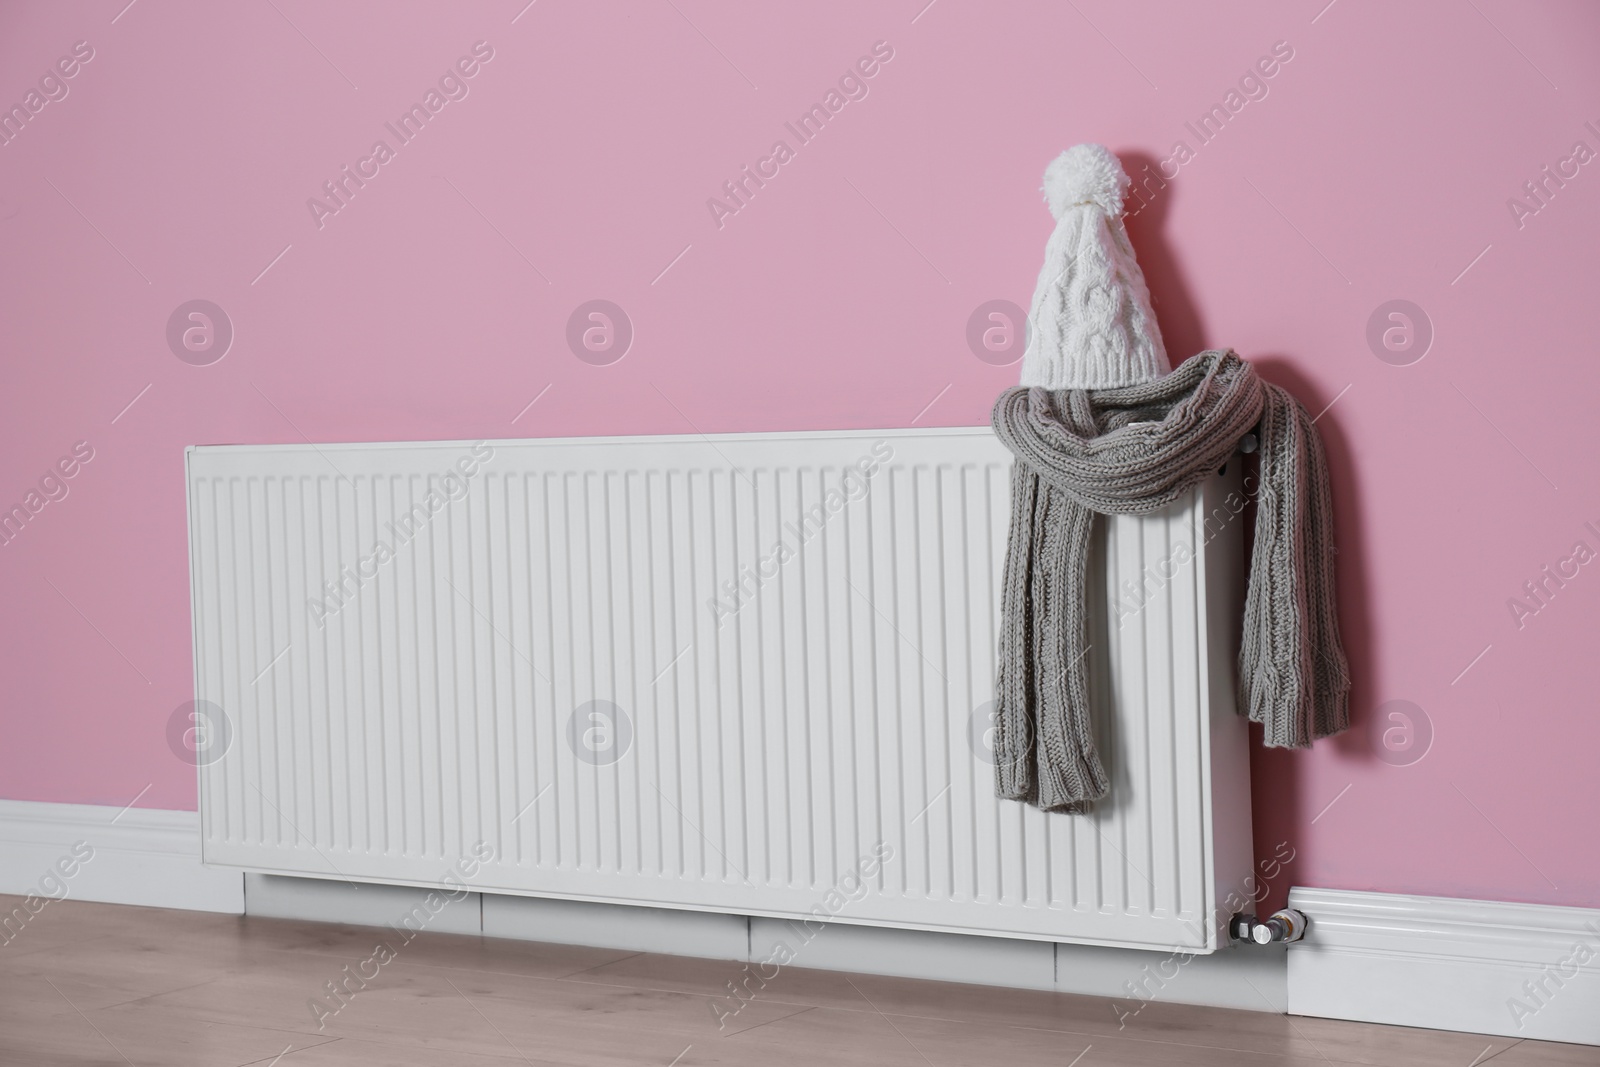 Photo of Modern radiator with knitted hat and scarf near color wall indoors. Central heating system